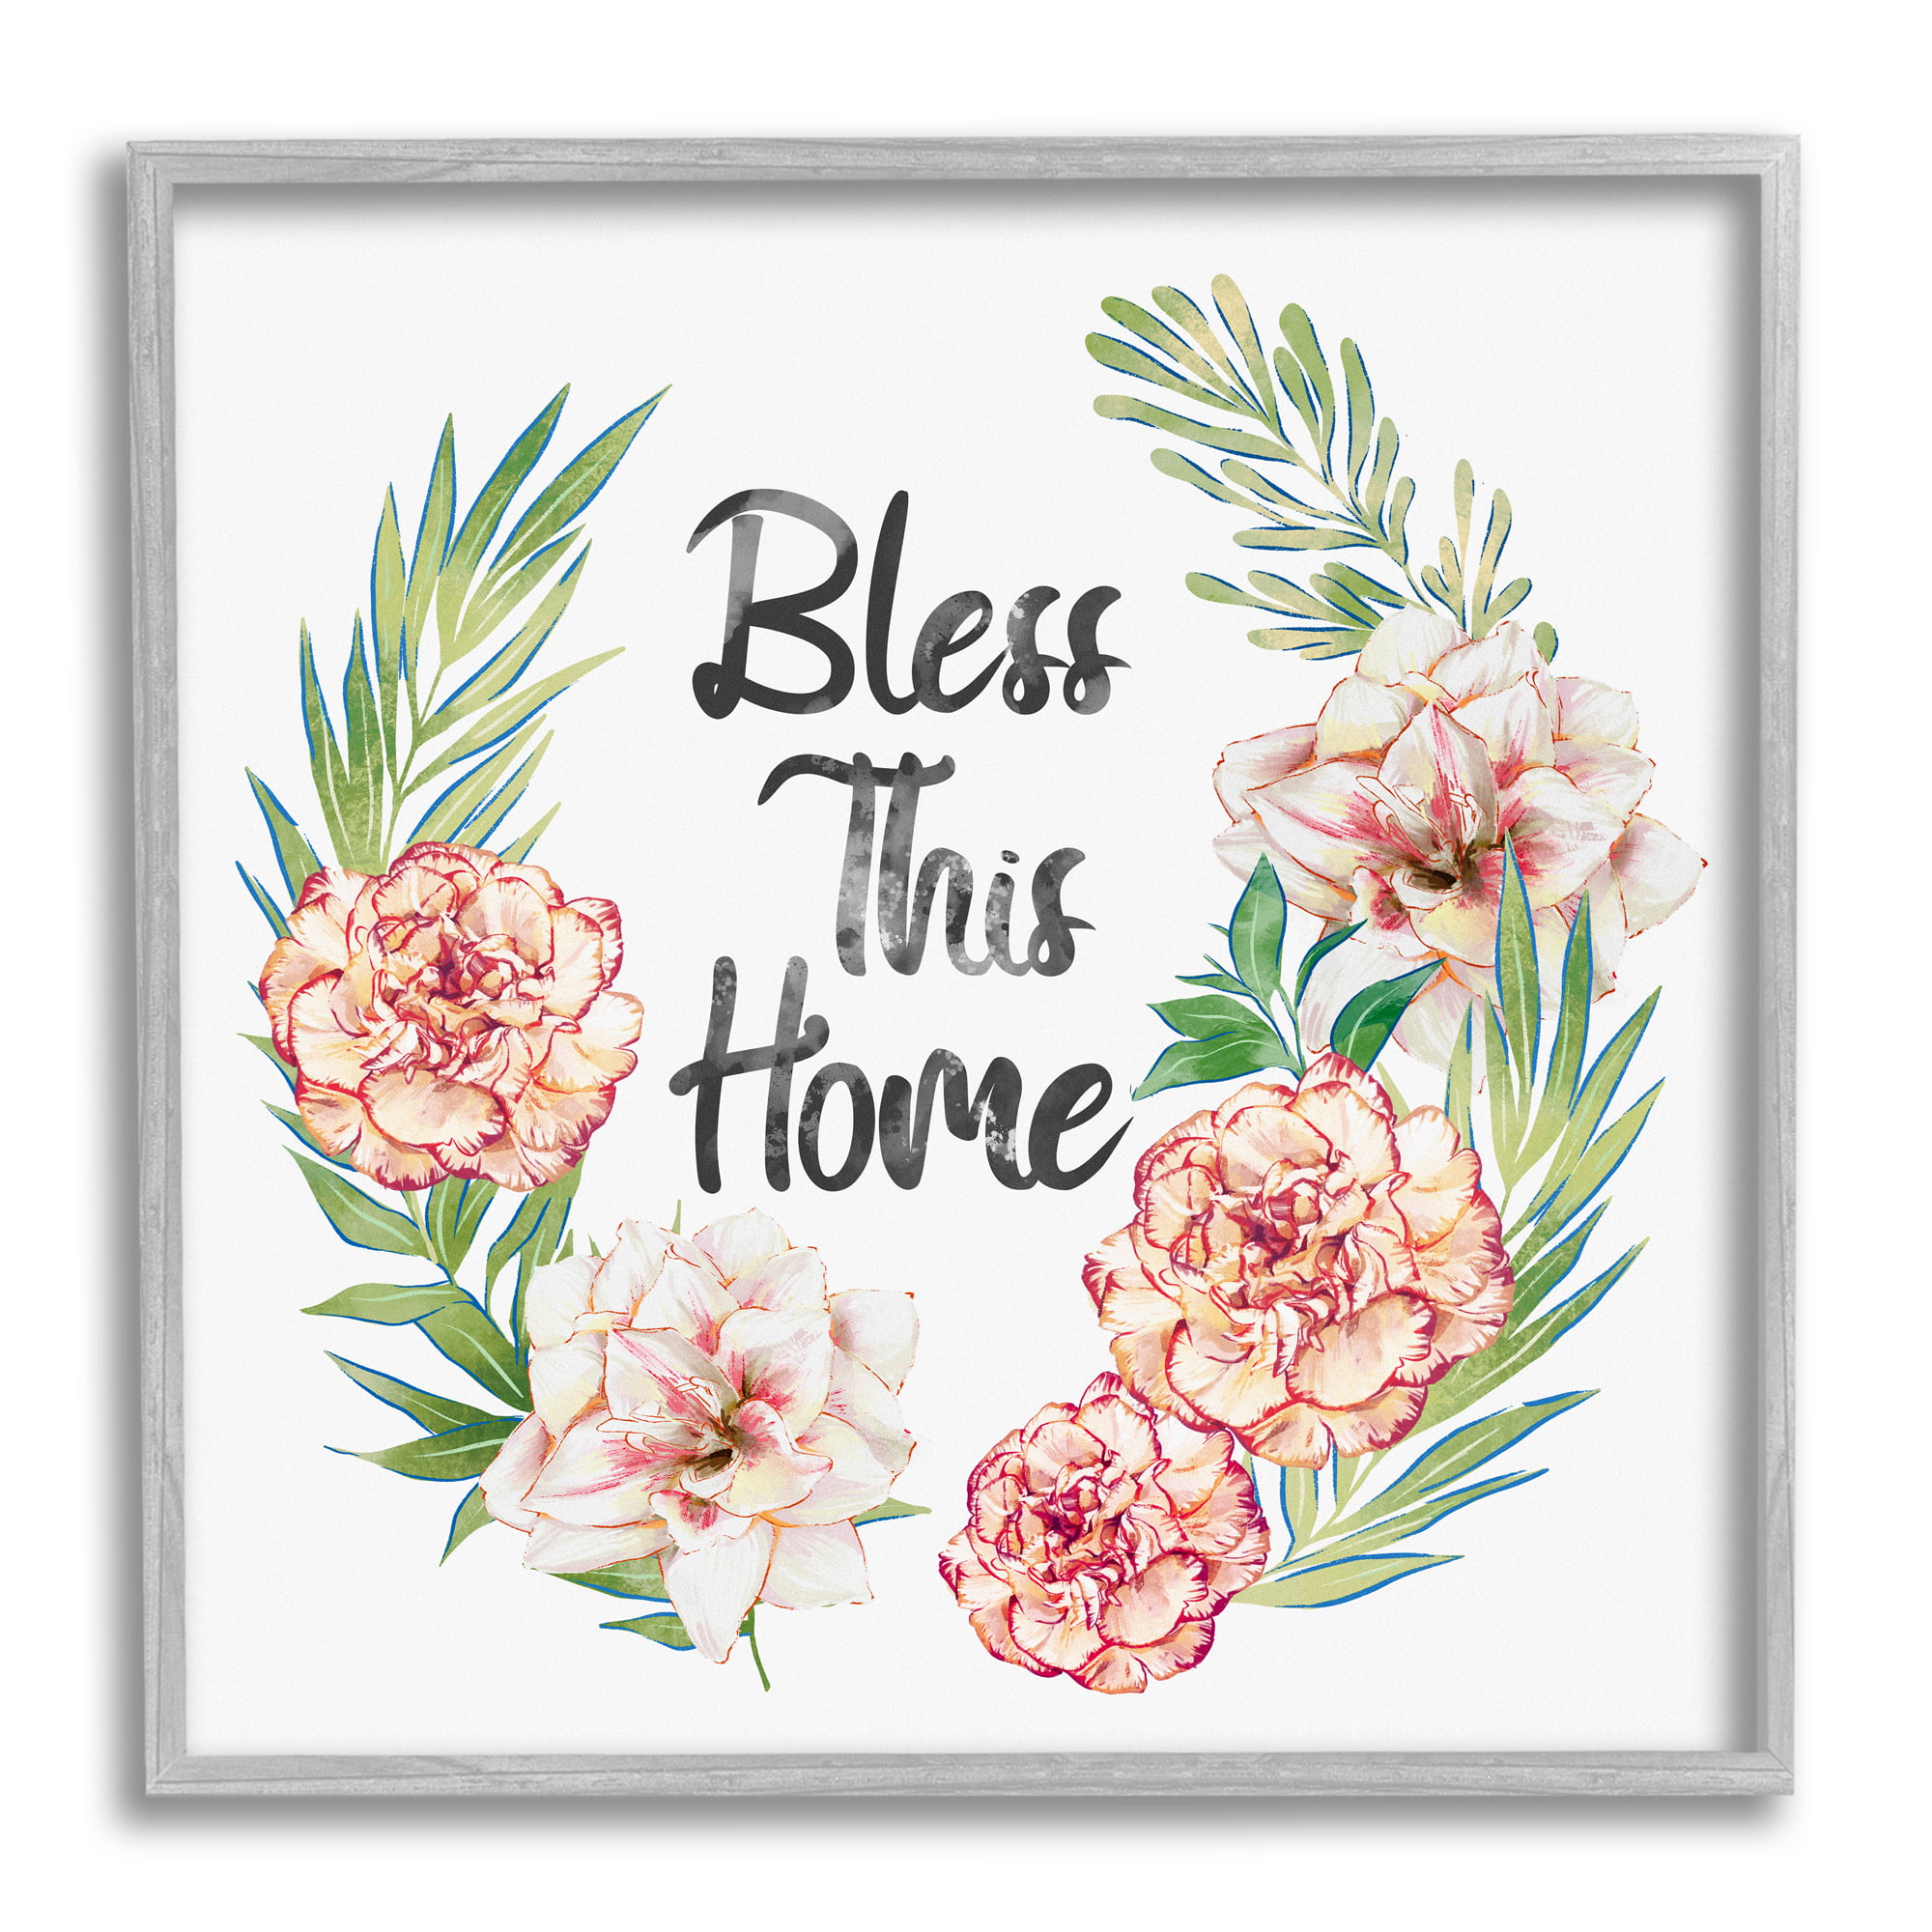 The Stupell Home Decor Collection Blooming Floral Display Designer